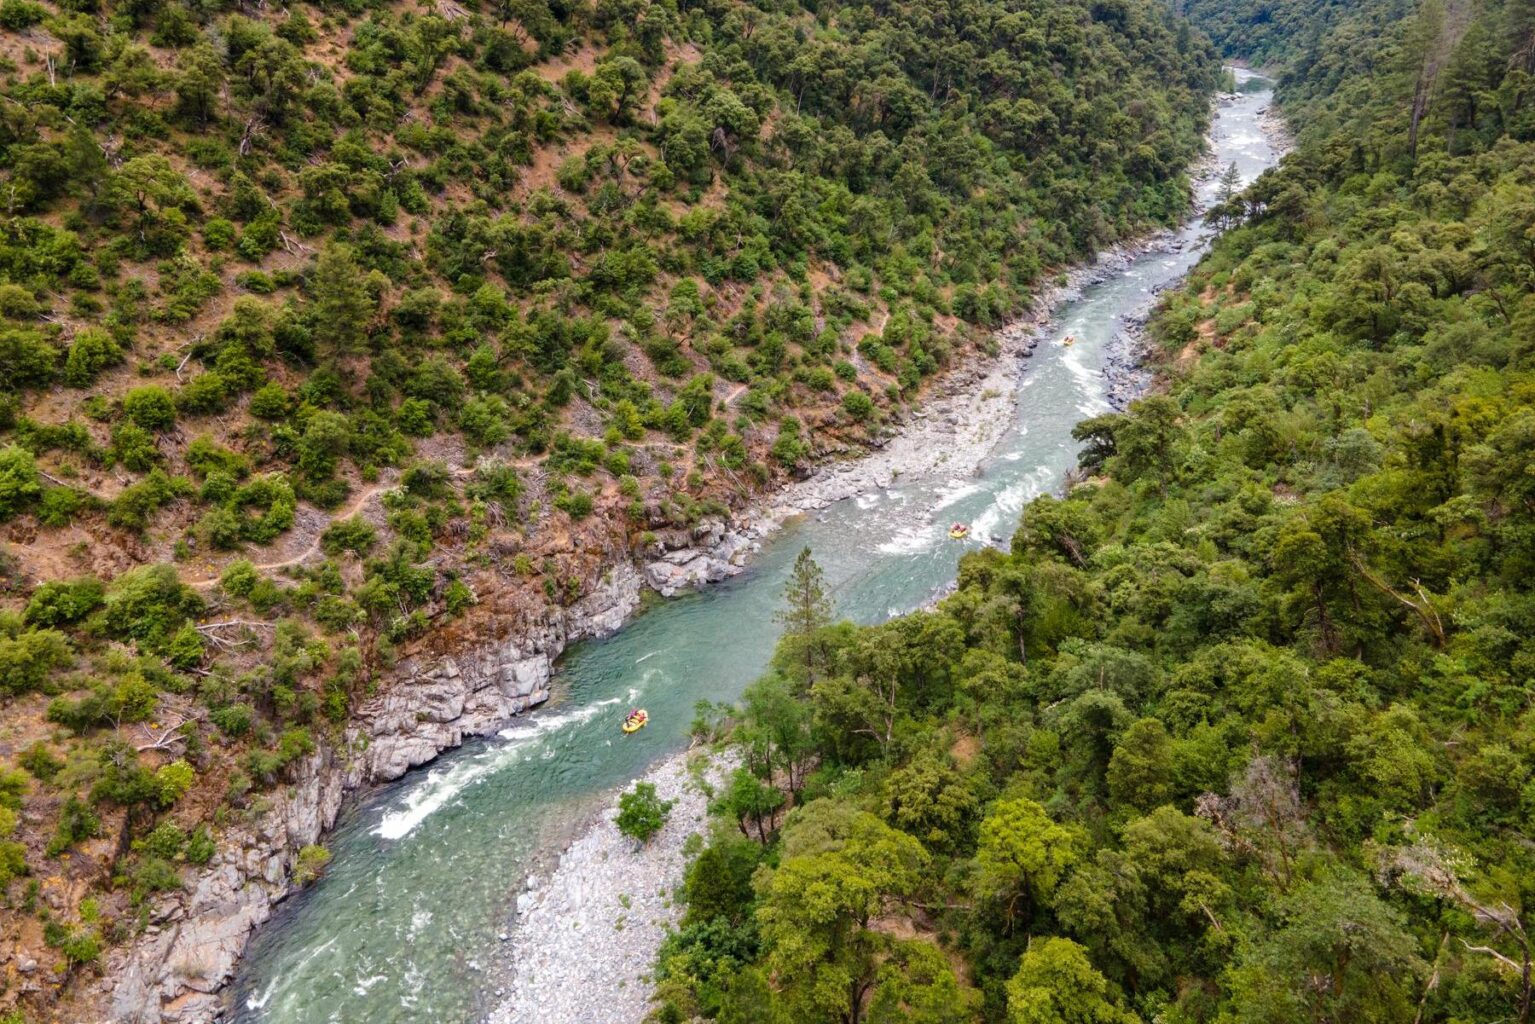 The North Fork of the American River canyon.